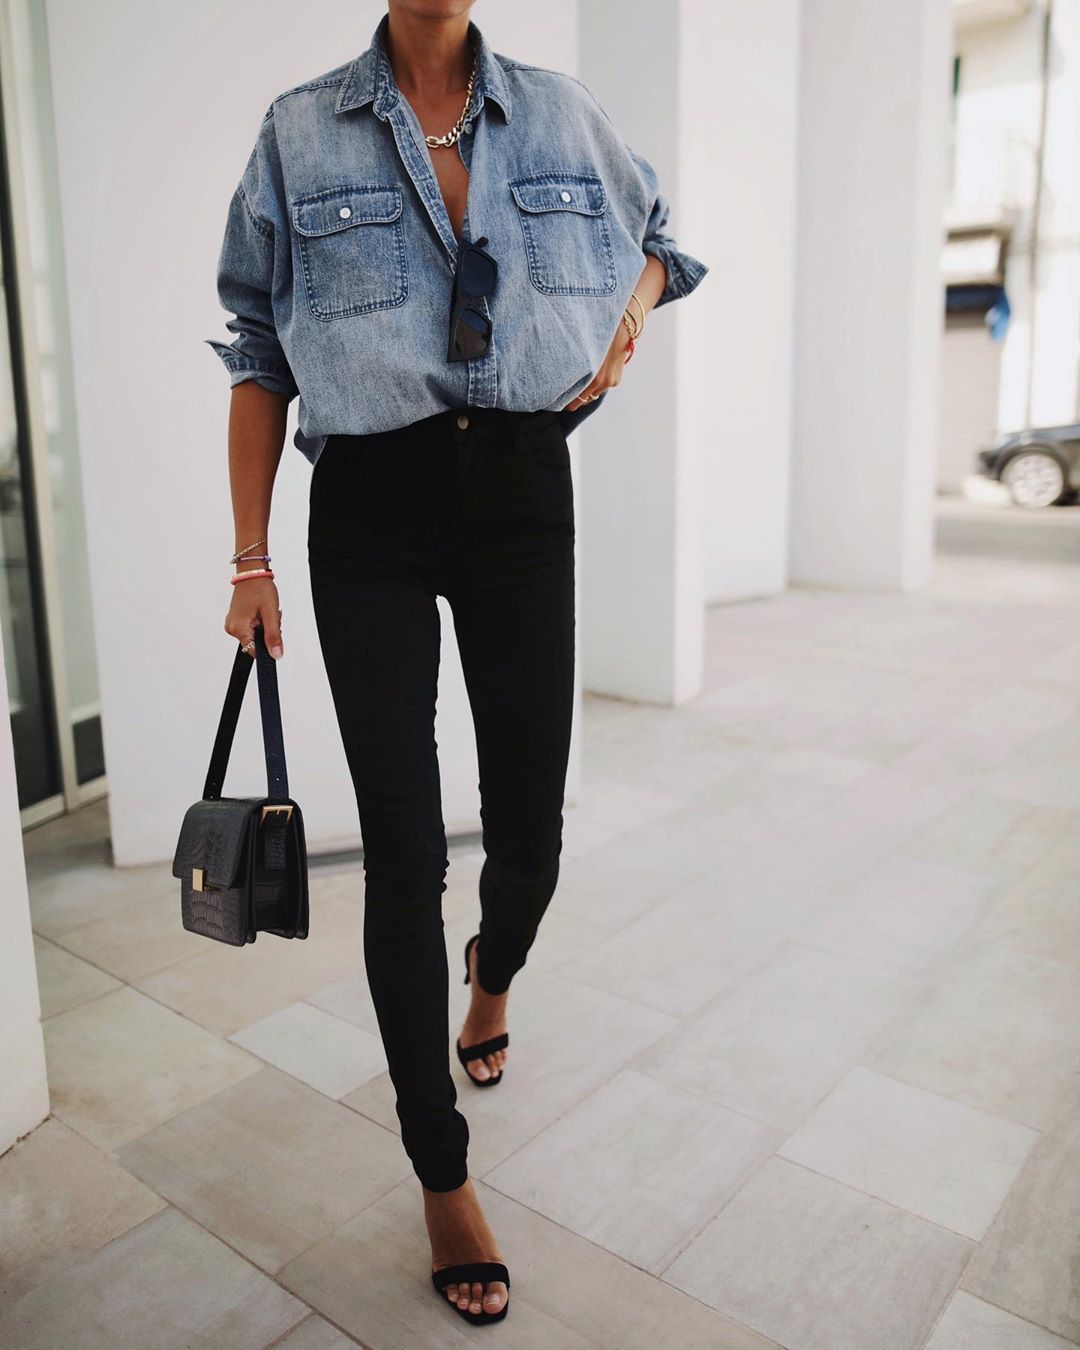 This Outfit Puts a Chic Spin on Casual Basics